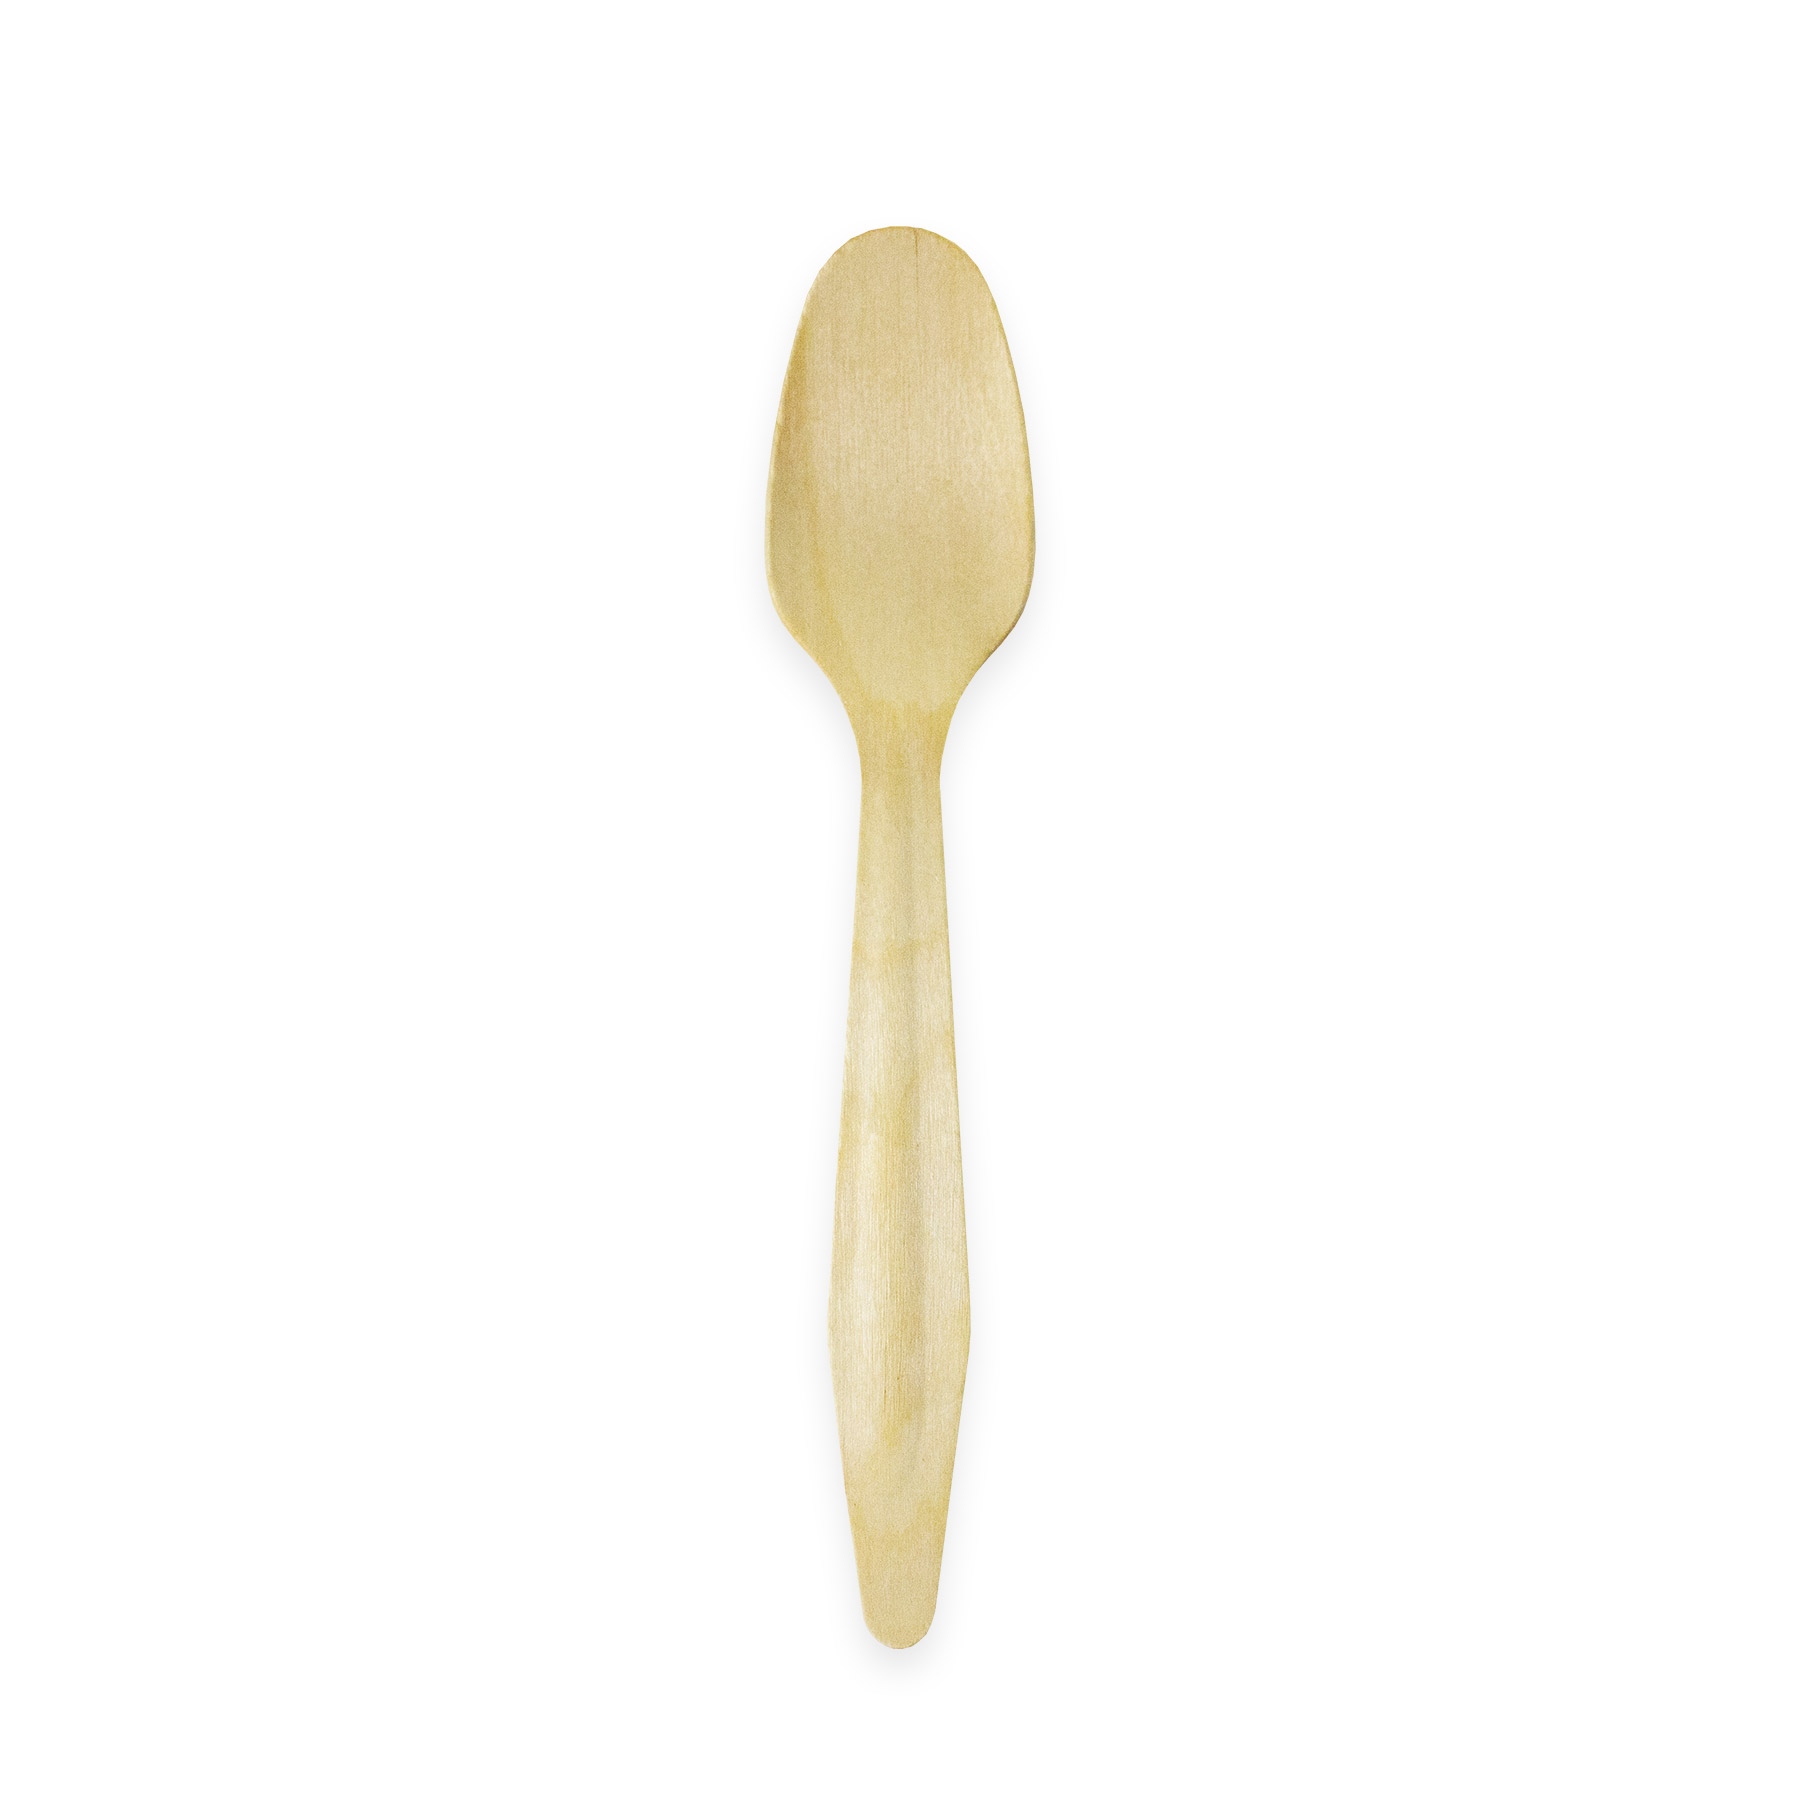 Wooden Spoon 1000 per case – Green Safe Products